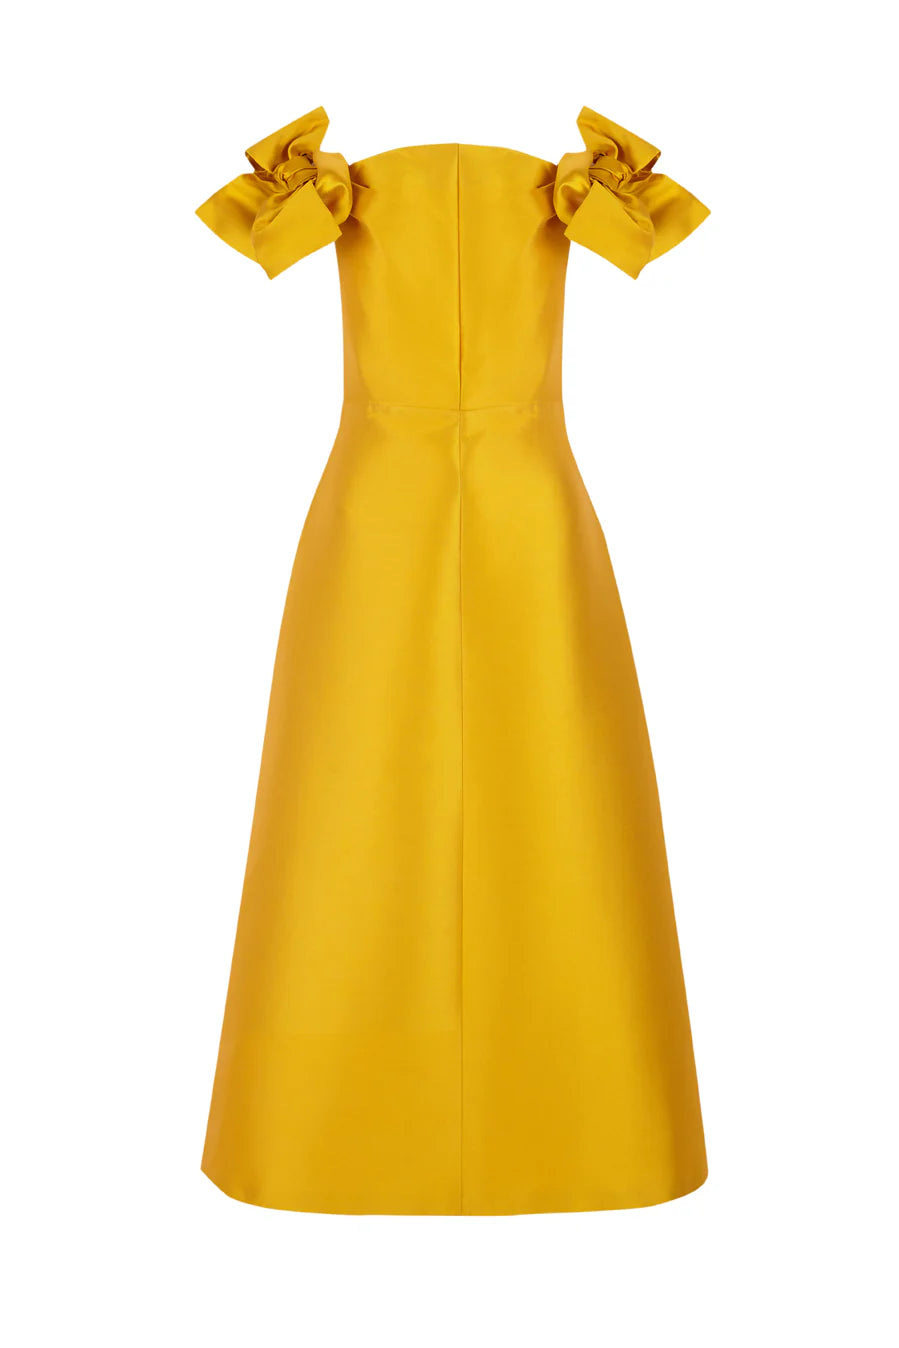 THE 2ND SKIN OFF THE SHOULDER DRESS WITH BOWS. Available in two colours - yellow and pink